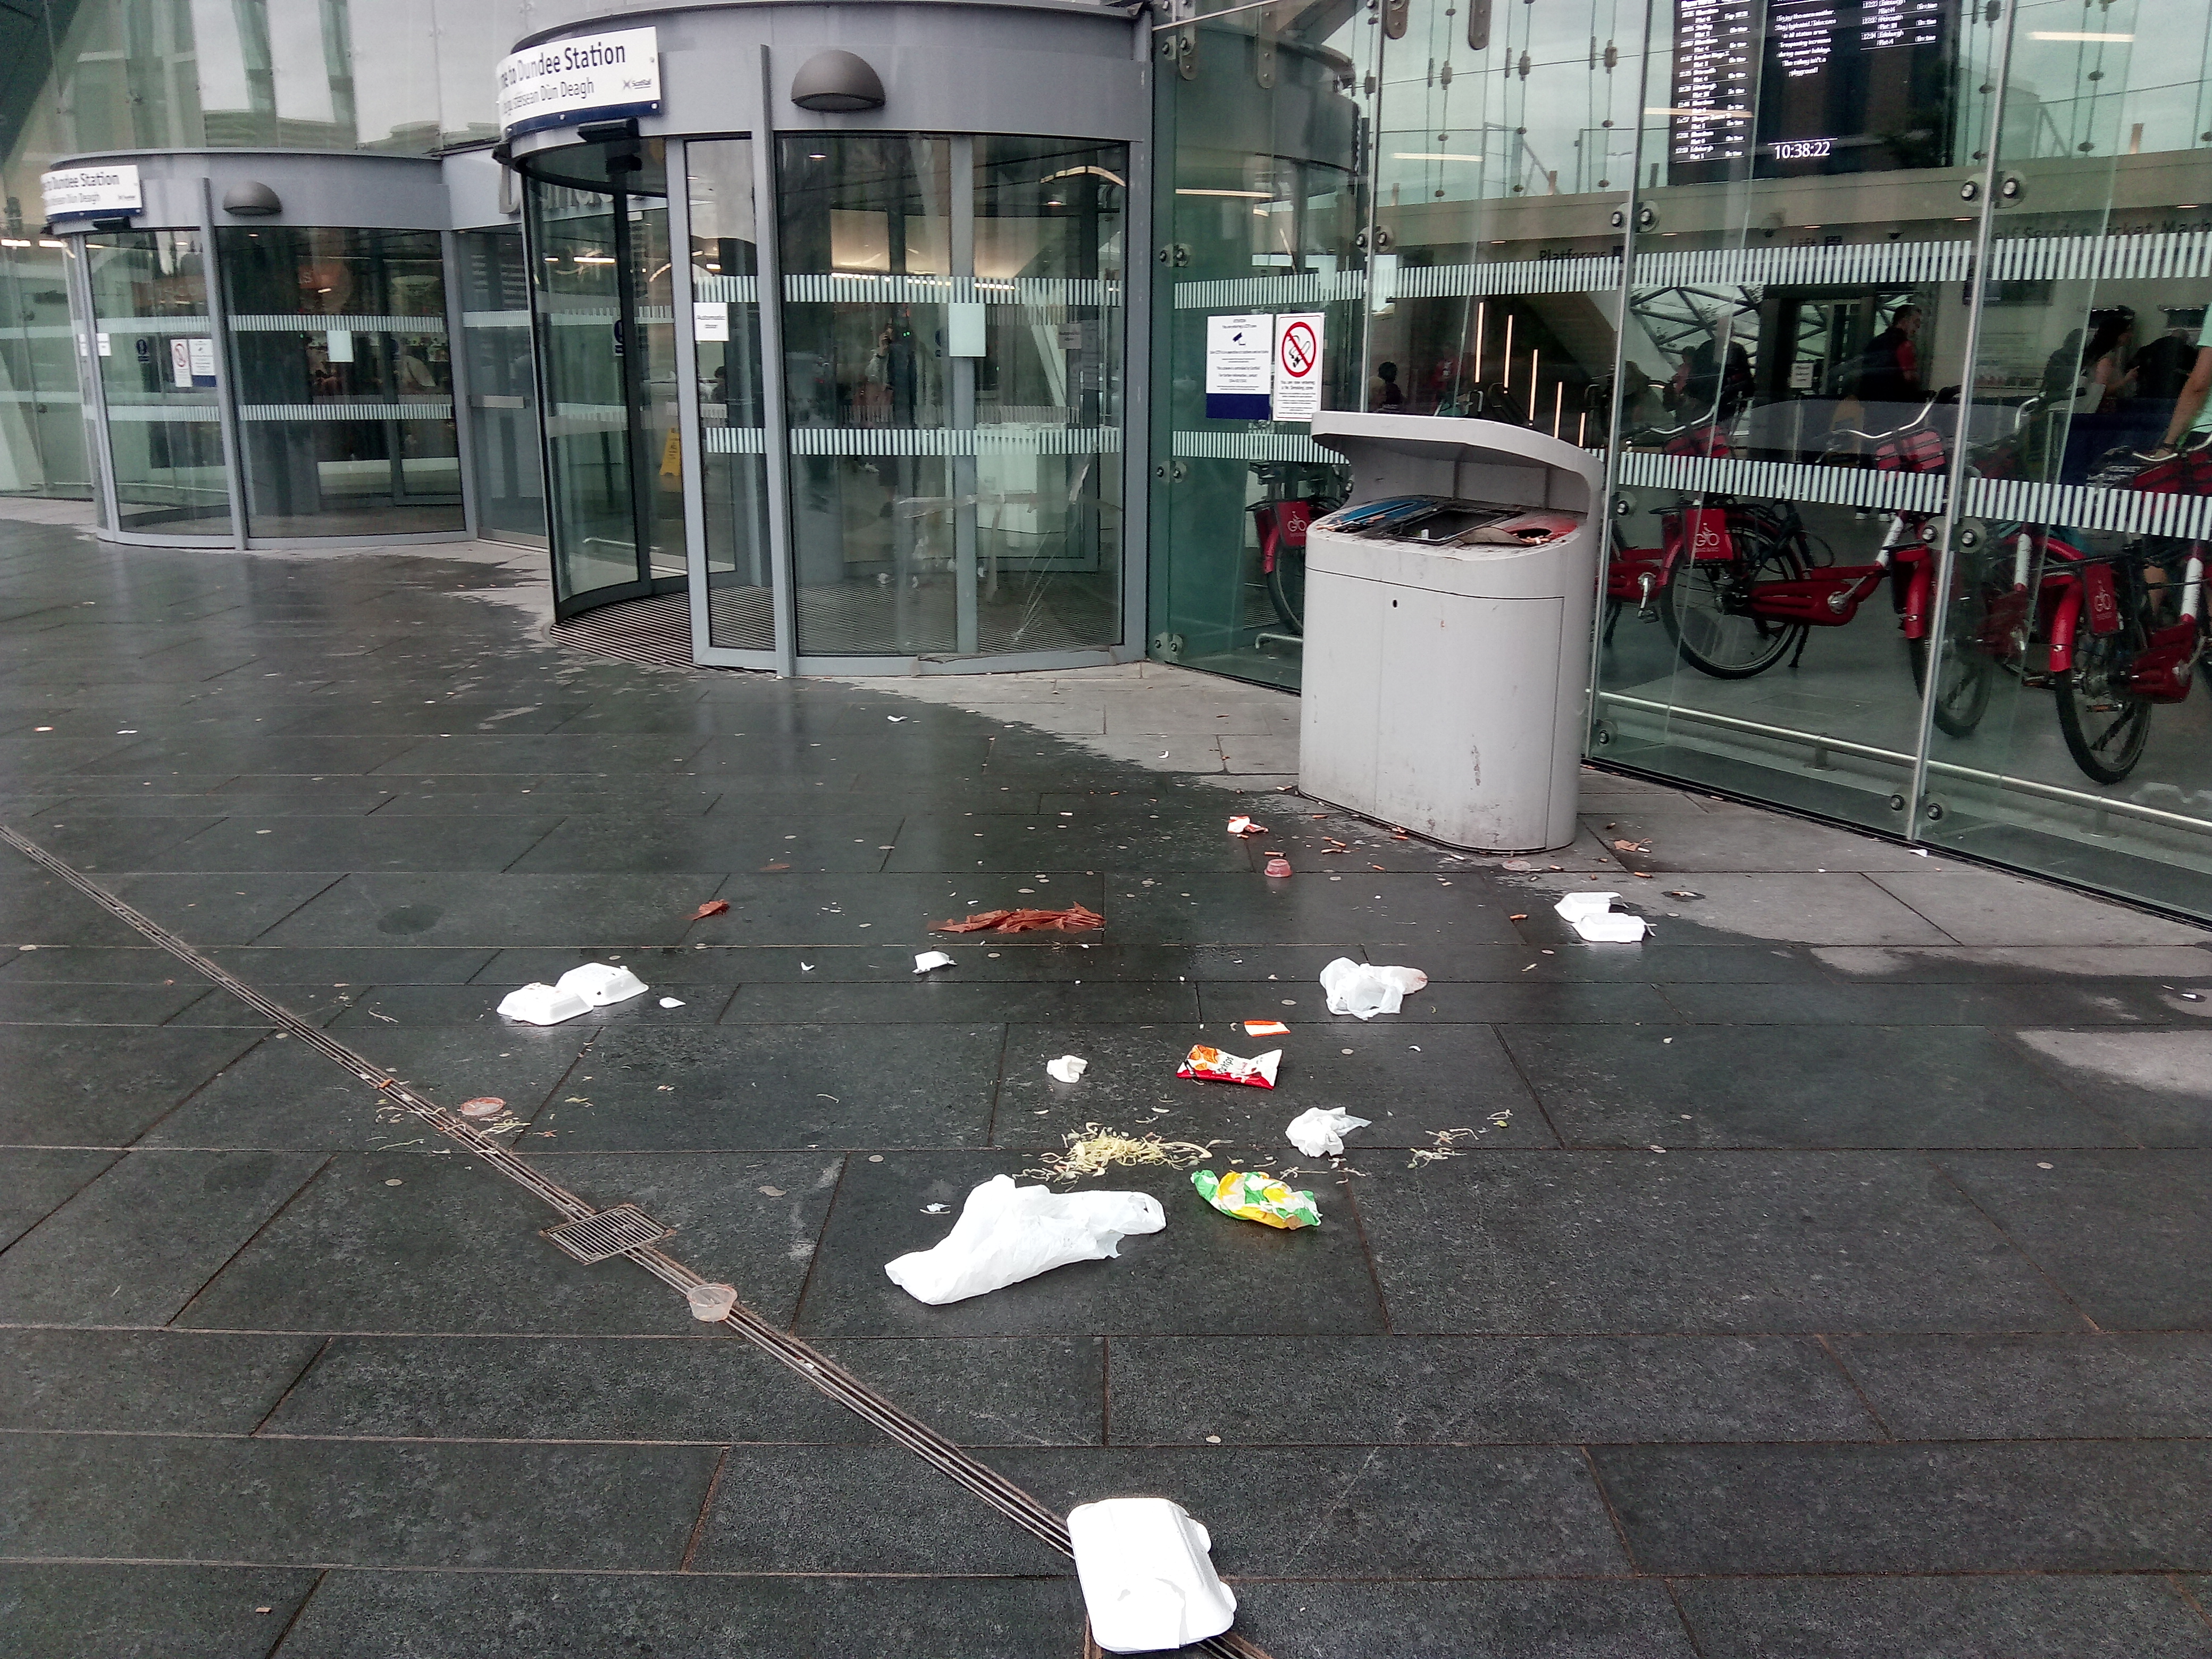 Rubbish was strewn outside Dundee train station.